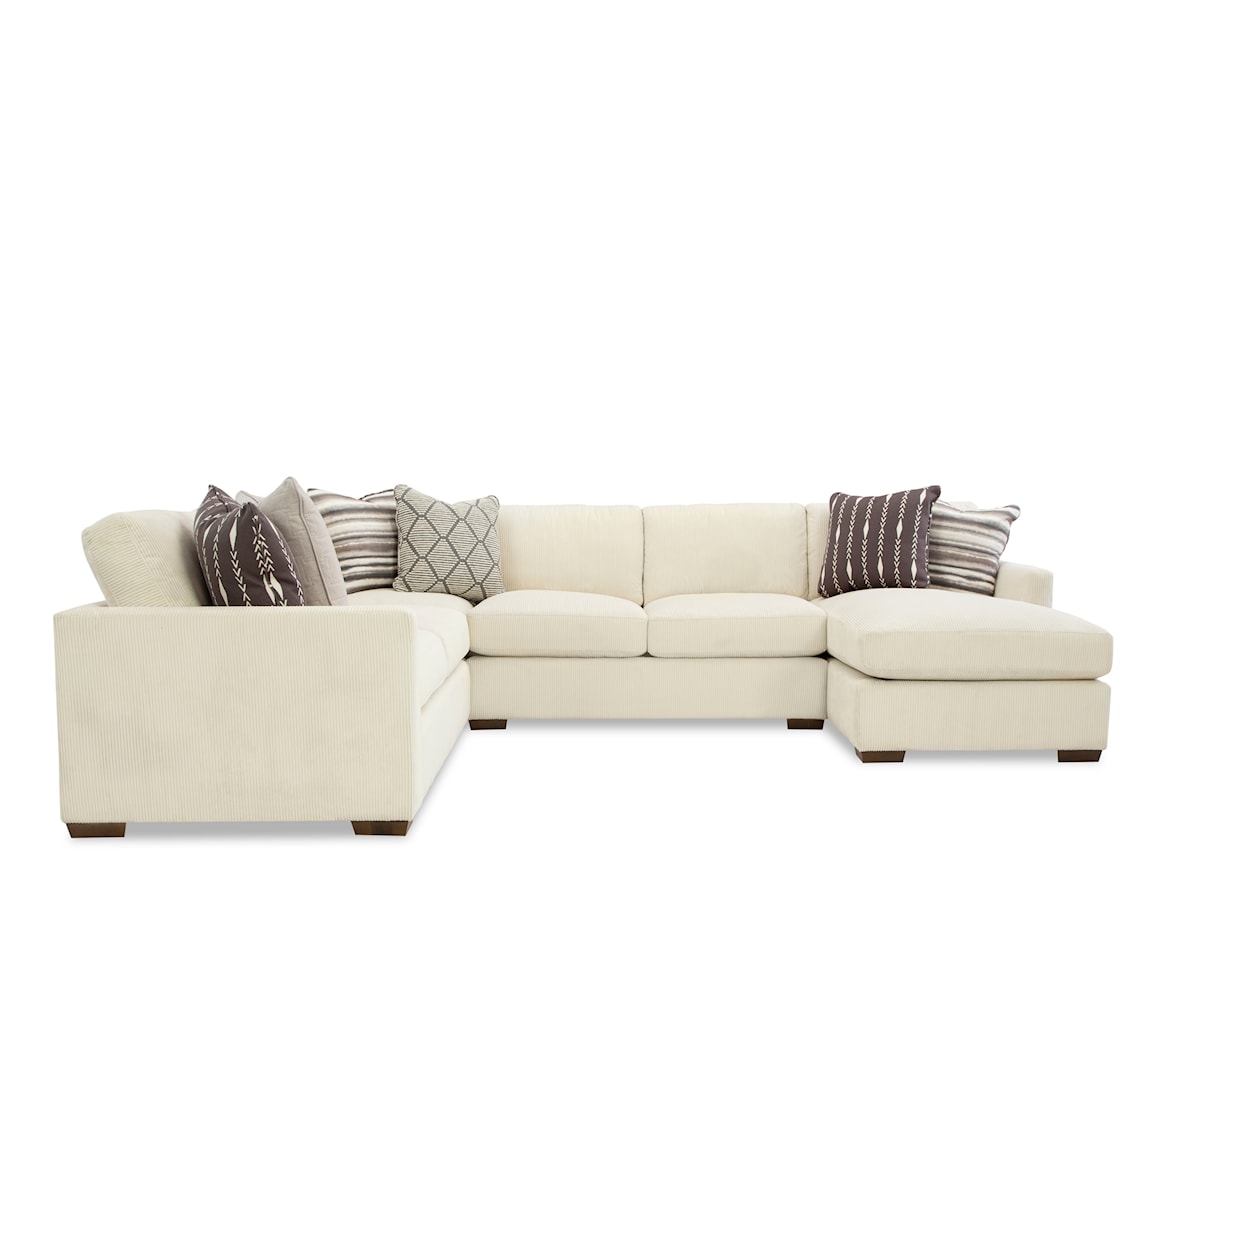 Hickorycraft 783950 5-Seat Sectional Sofa with LAF Chaise